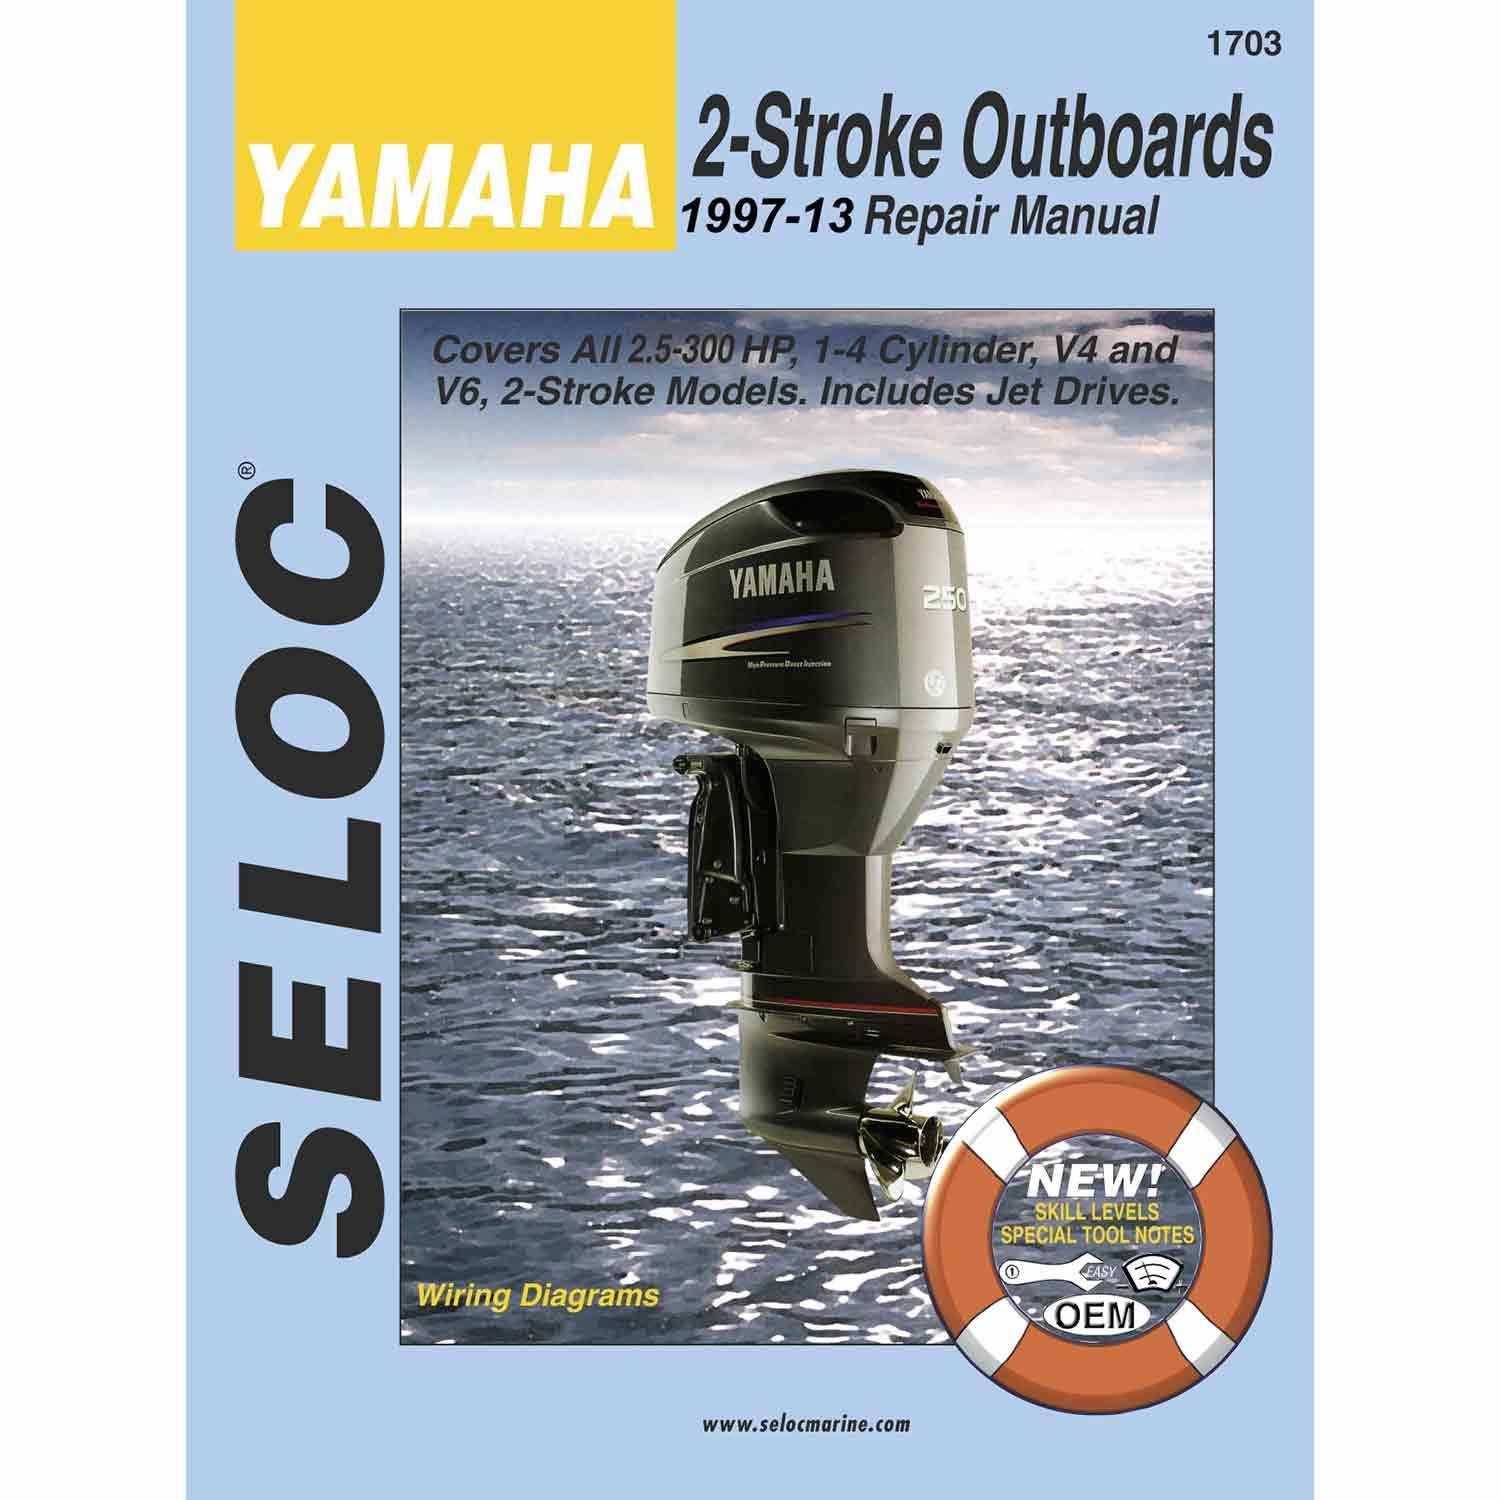 2023 Yamaha Stern Drive Diagram easy-to-use buying